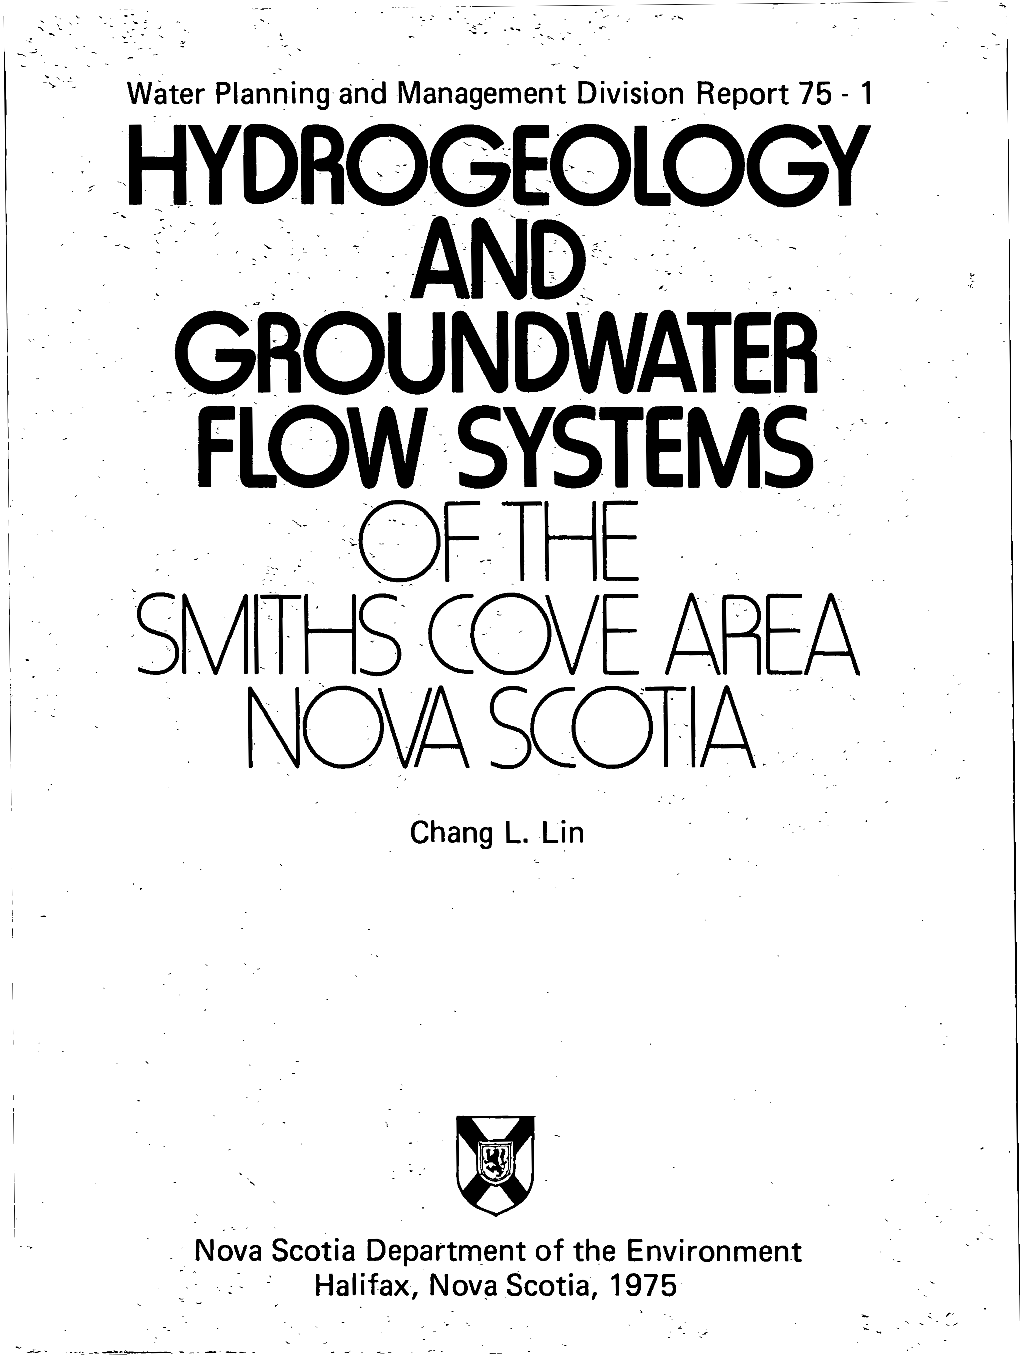 Hydrogeology and Groundwater Flow Systems of the Smiths Cove Area, NS